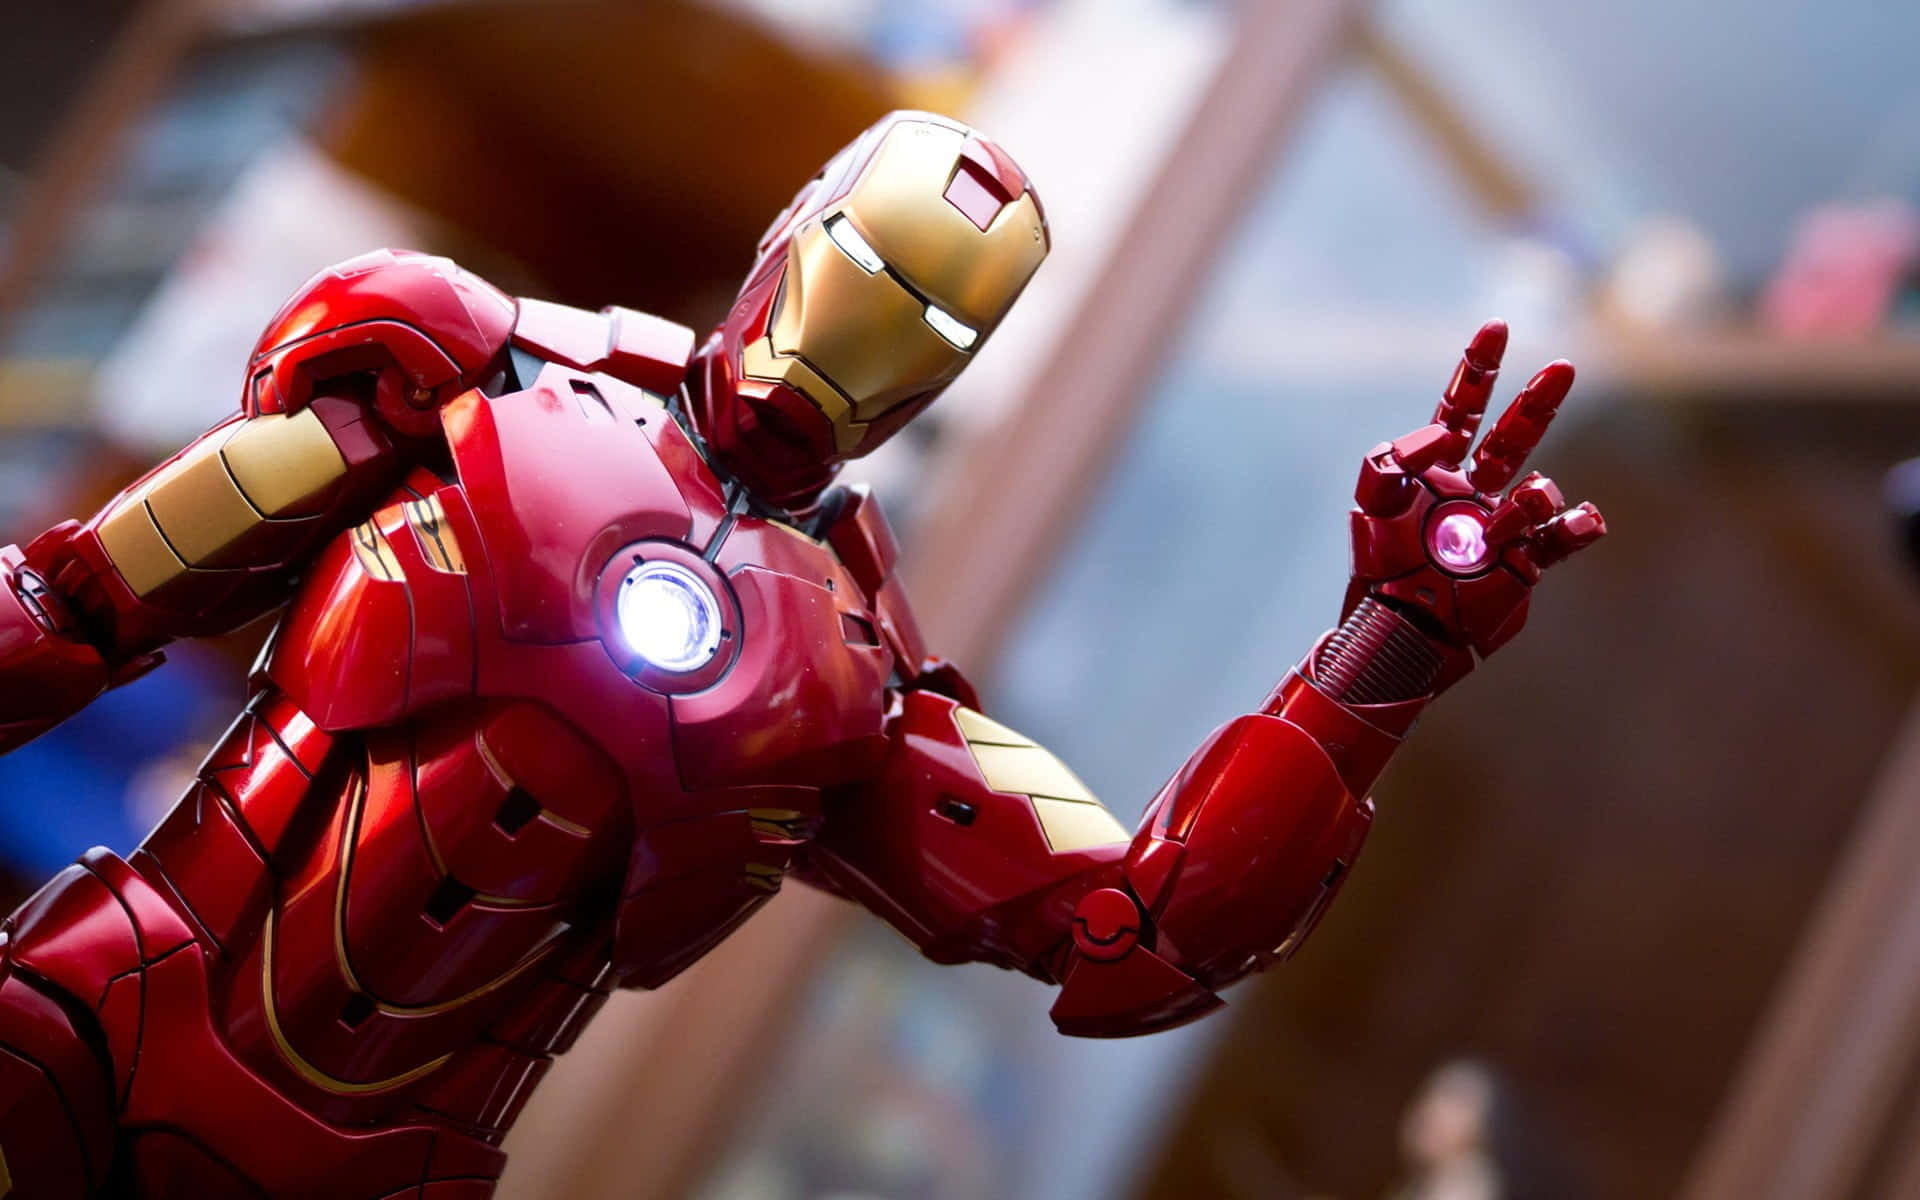 "Gather Your Friends&Reenact Your Favorite Ironman Scenes with Action Figures!" Wallpaper